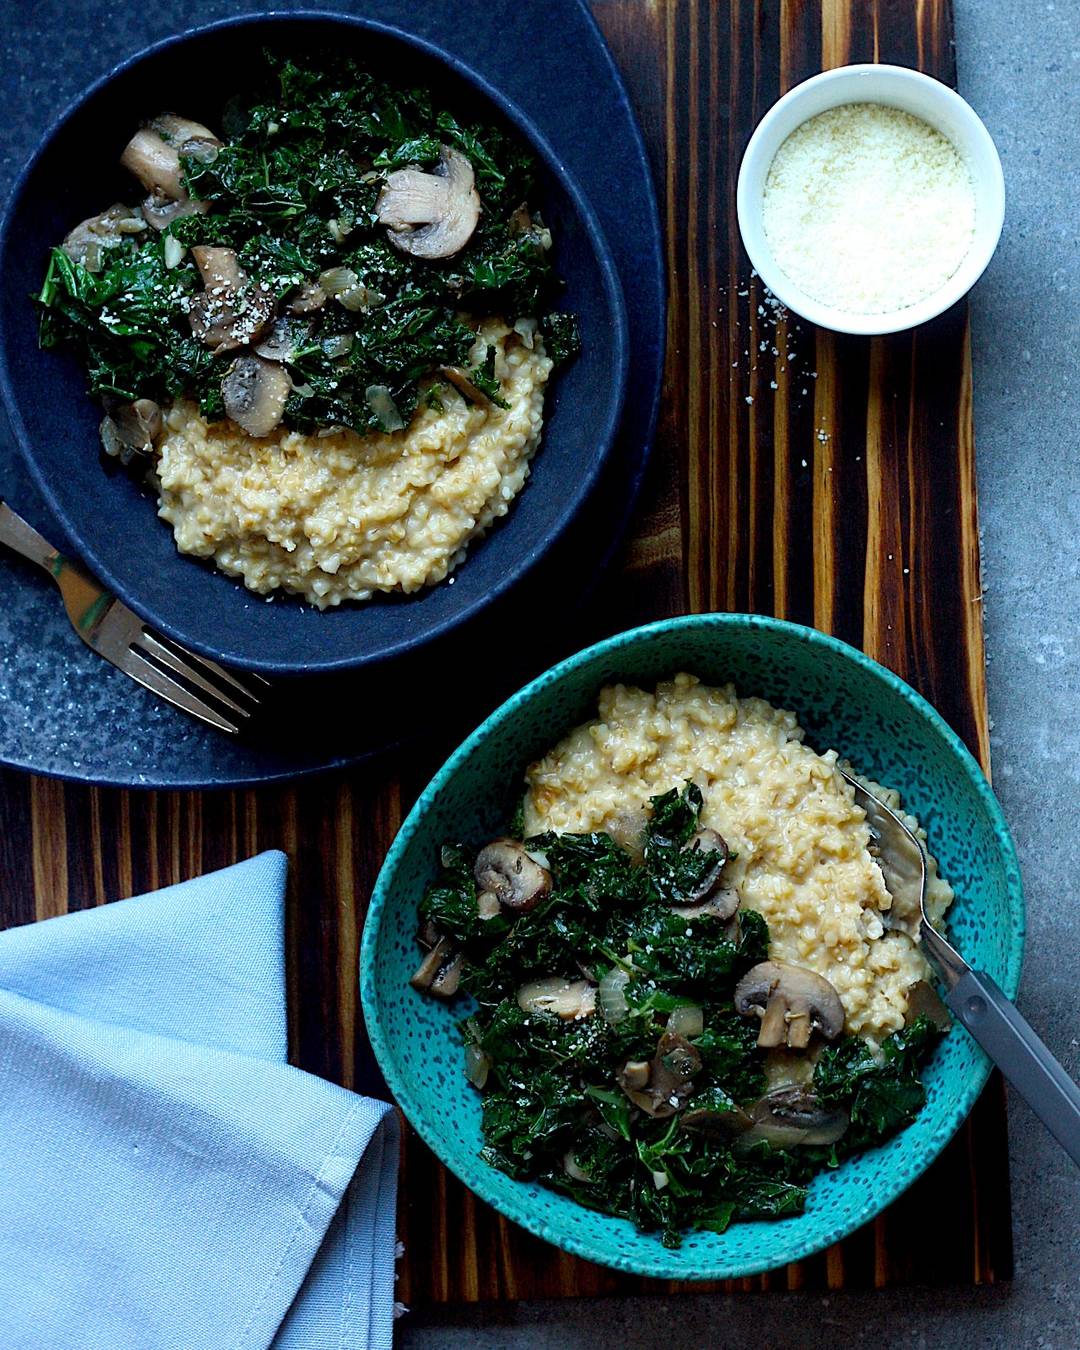 Steel Cut Oat "Risotto" with Mushrooms and Kale